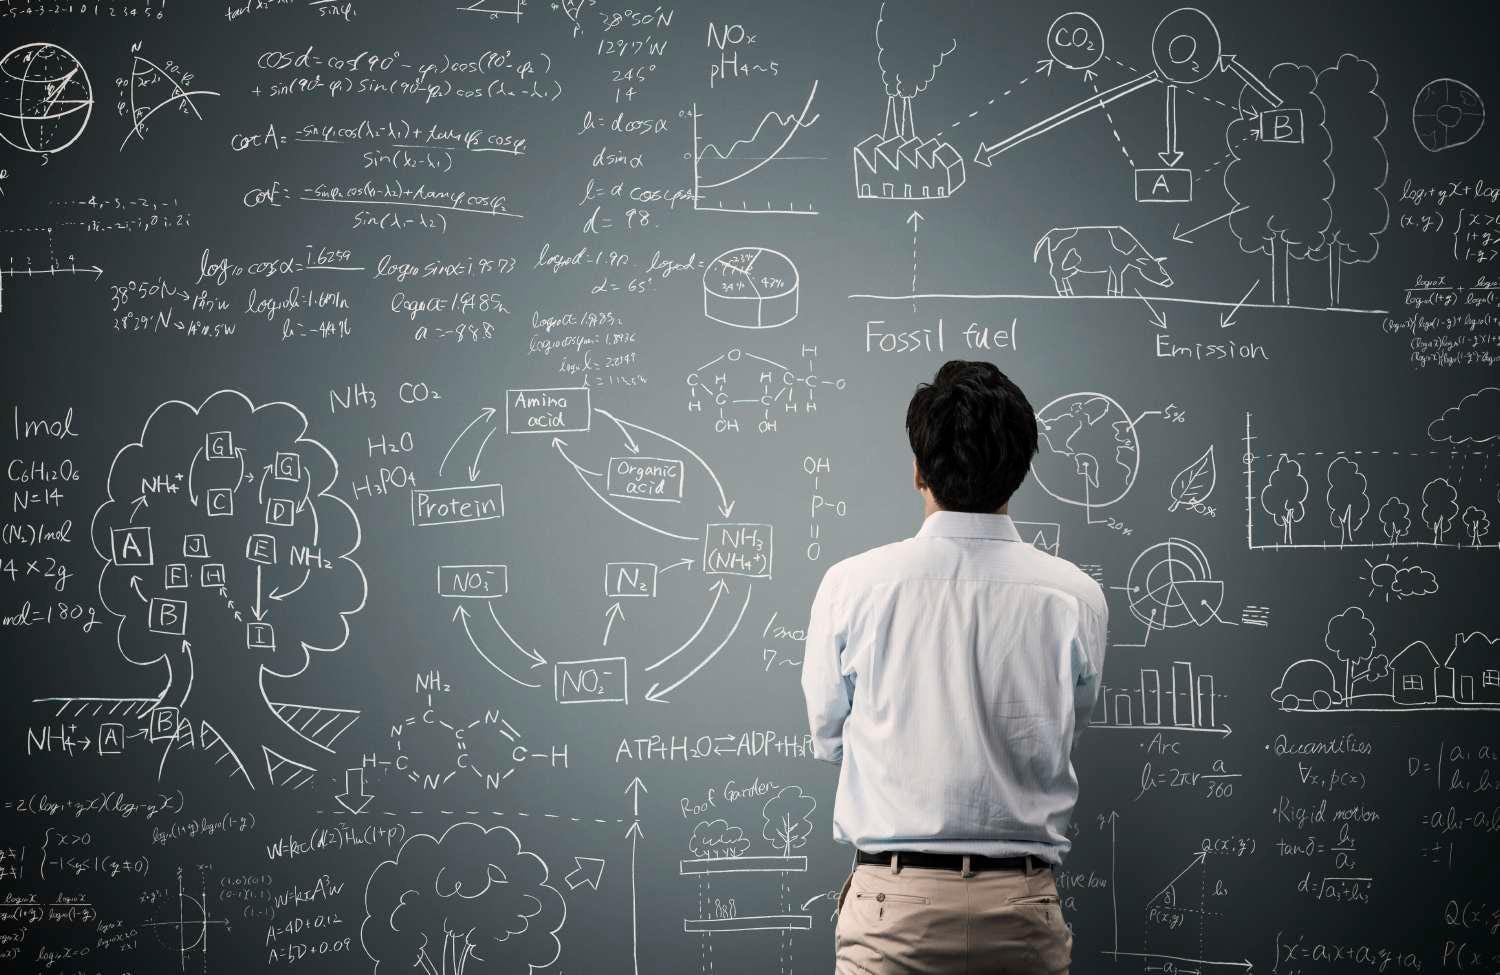 Man with back to camera looking at data and drawings on chalkboard